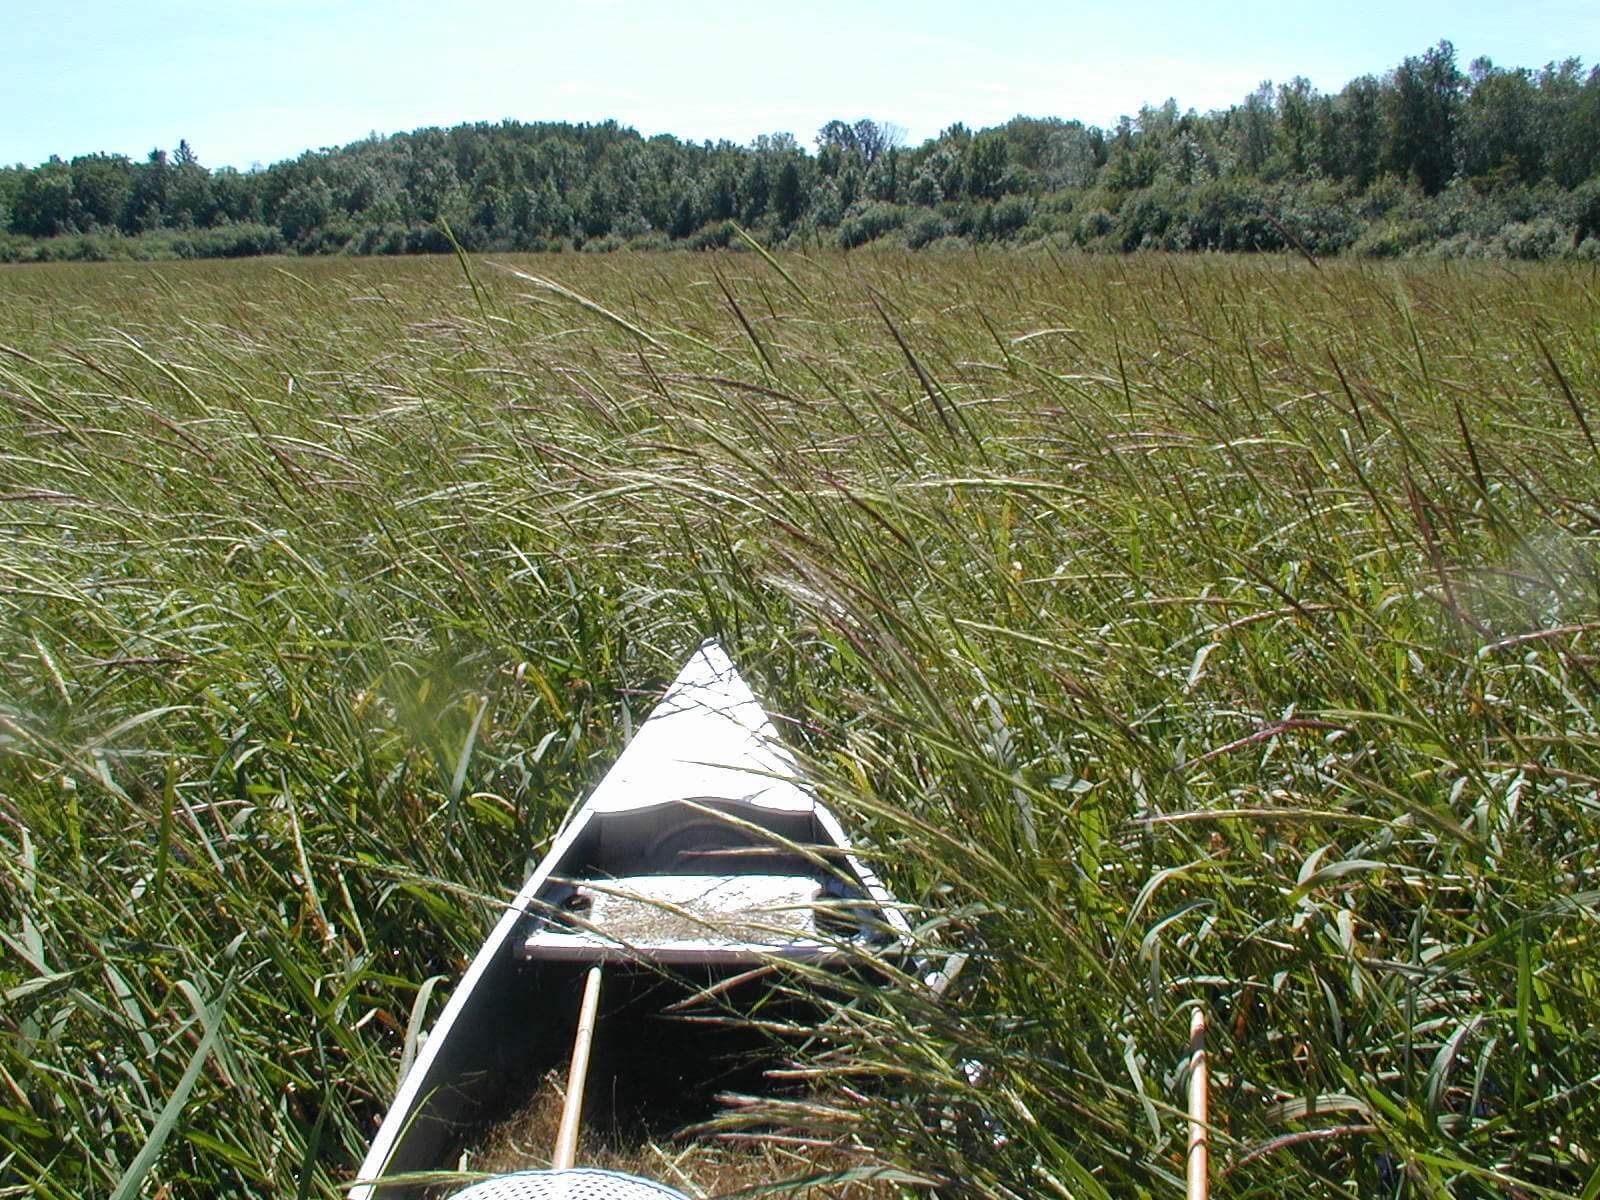 Knowles-Nelson Stewardship Program - a metal canoe floating in a thicket of wild rice that looks like wispy green grass with a background of a forest